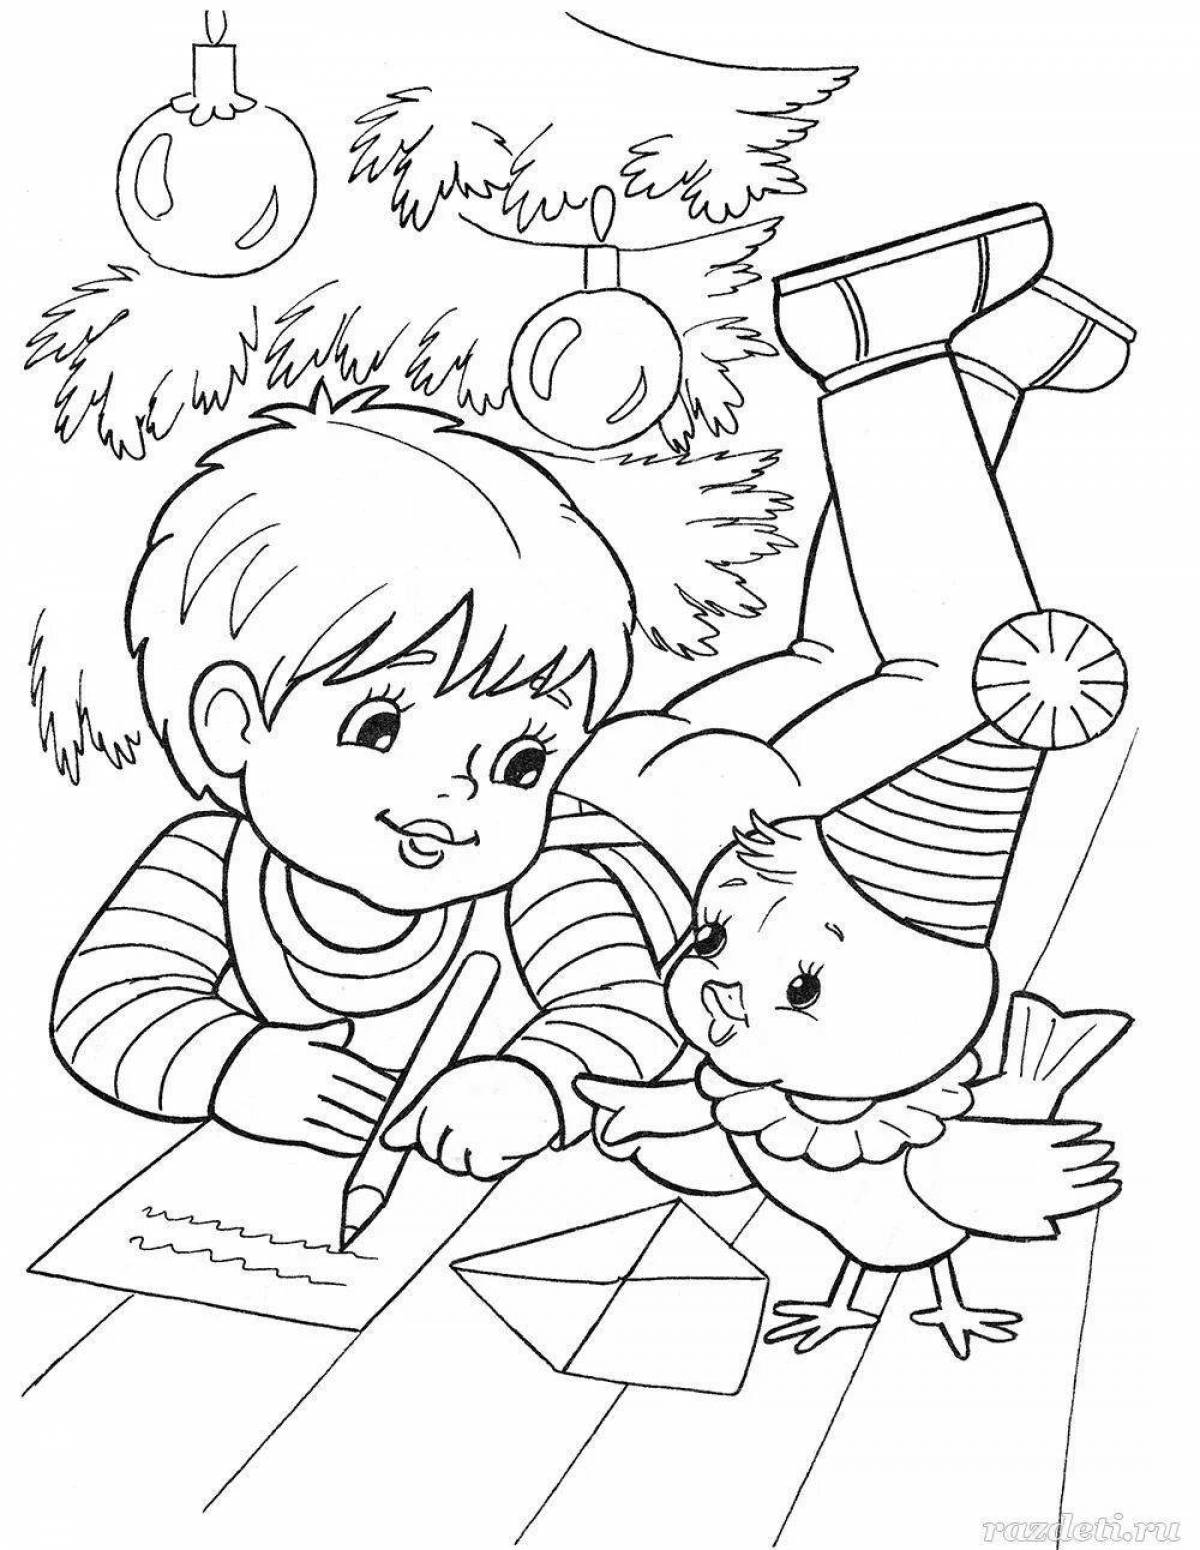 Colorful Christmas coloring book for preschoolers